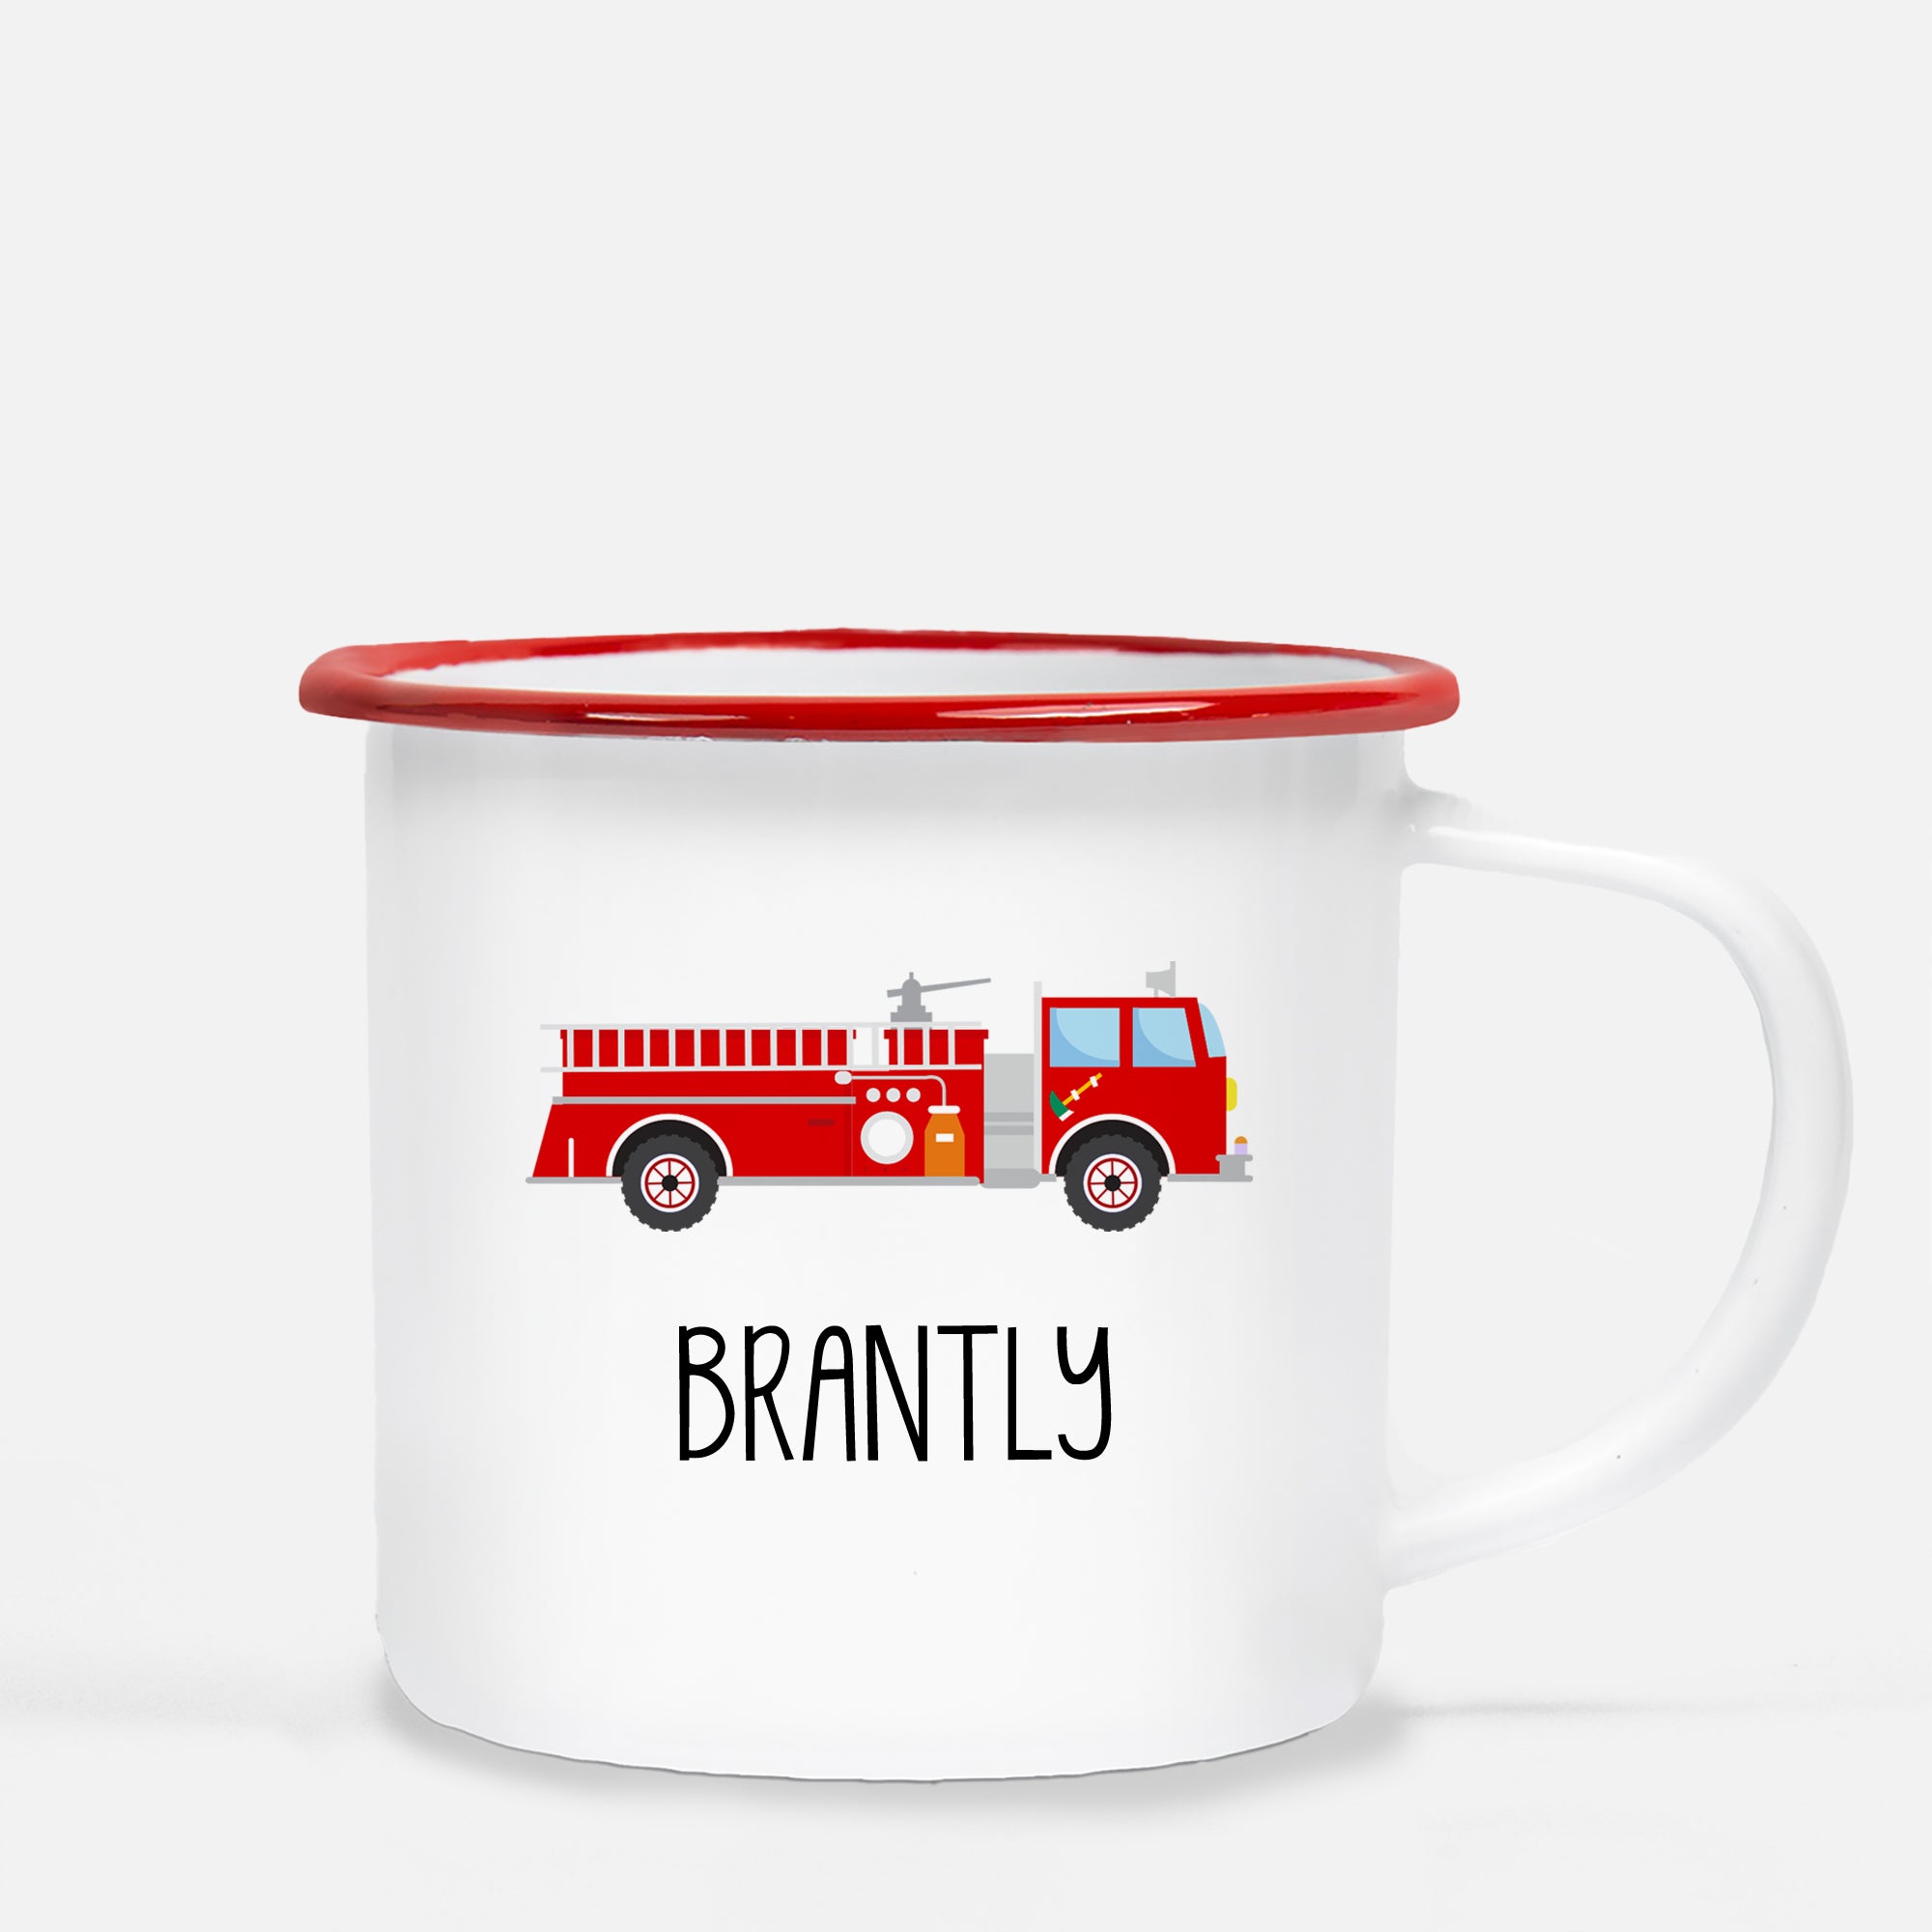 Firetruck Camp Mug, Personalized with child's name, enamel coated stainless steel construction with a cute red lip